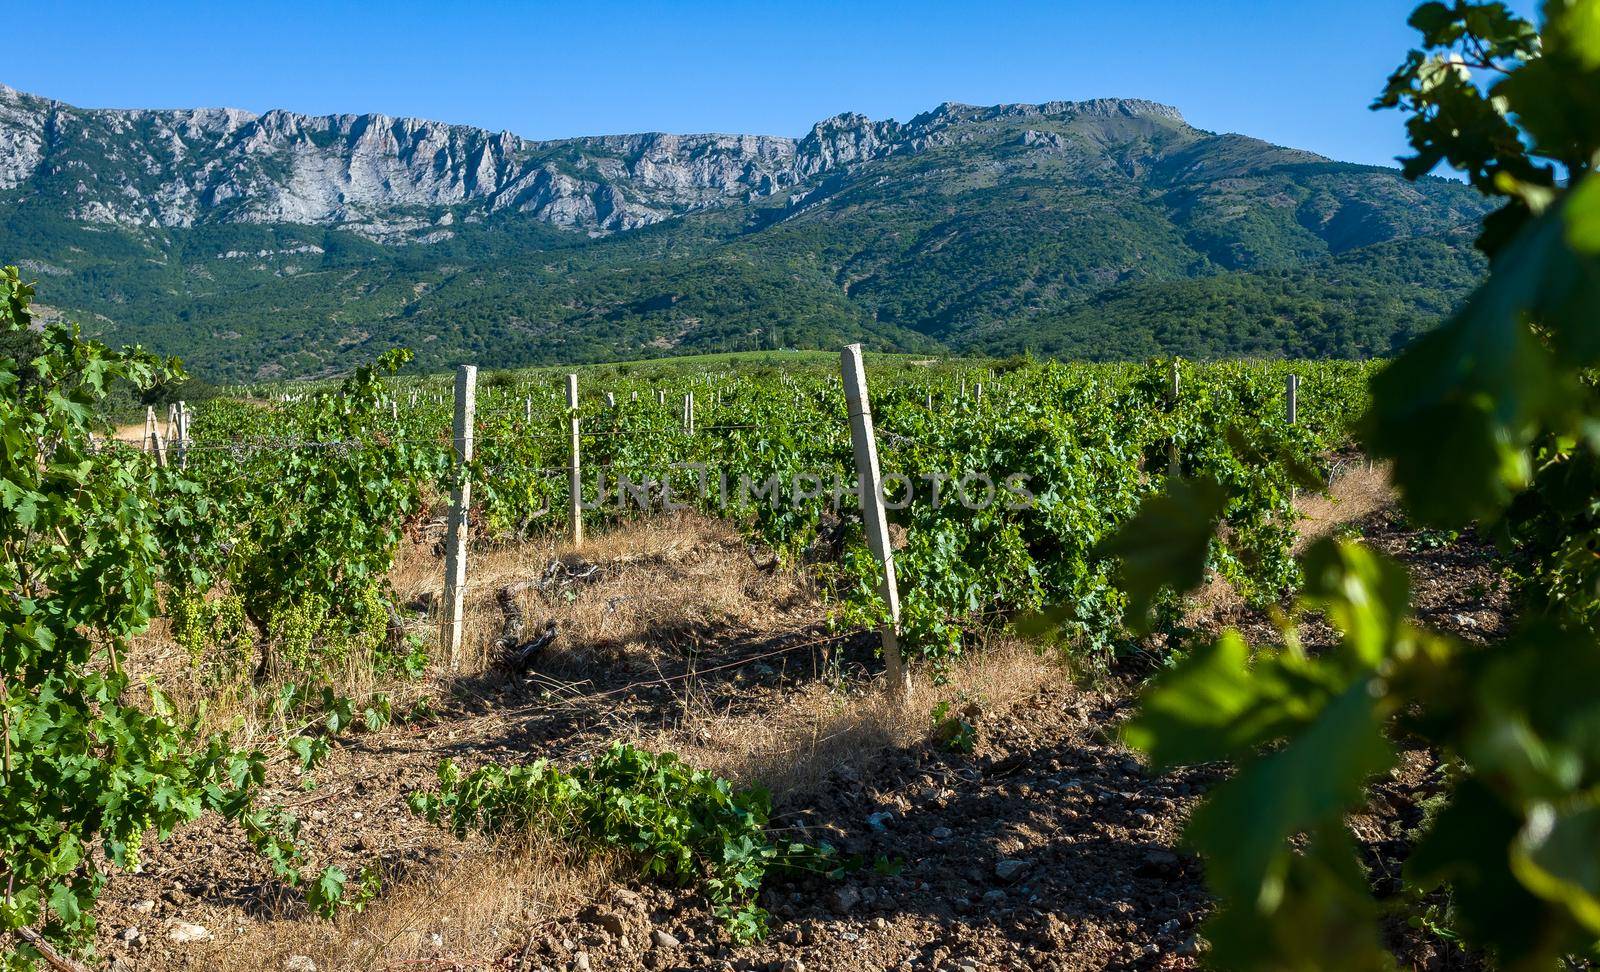 Rows of vineyards surrounded by rocky mountains in the early morning.